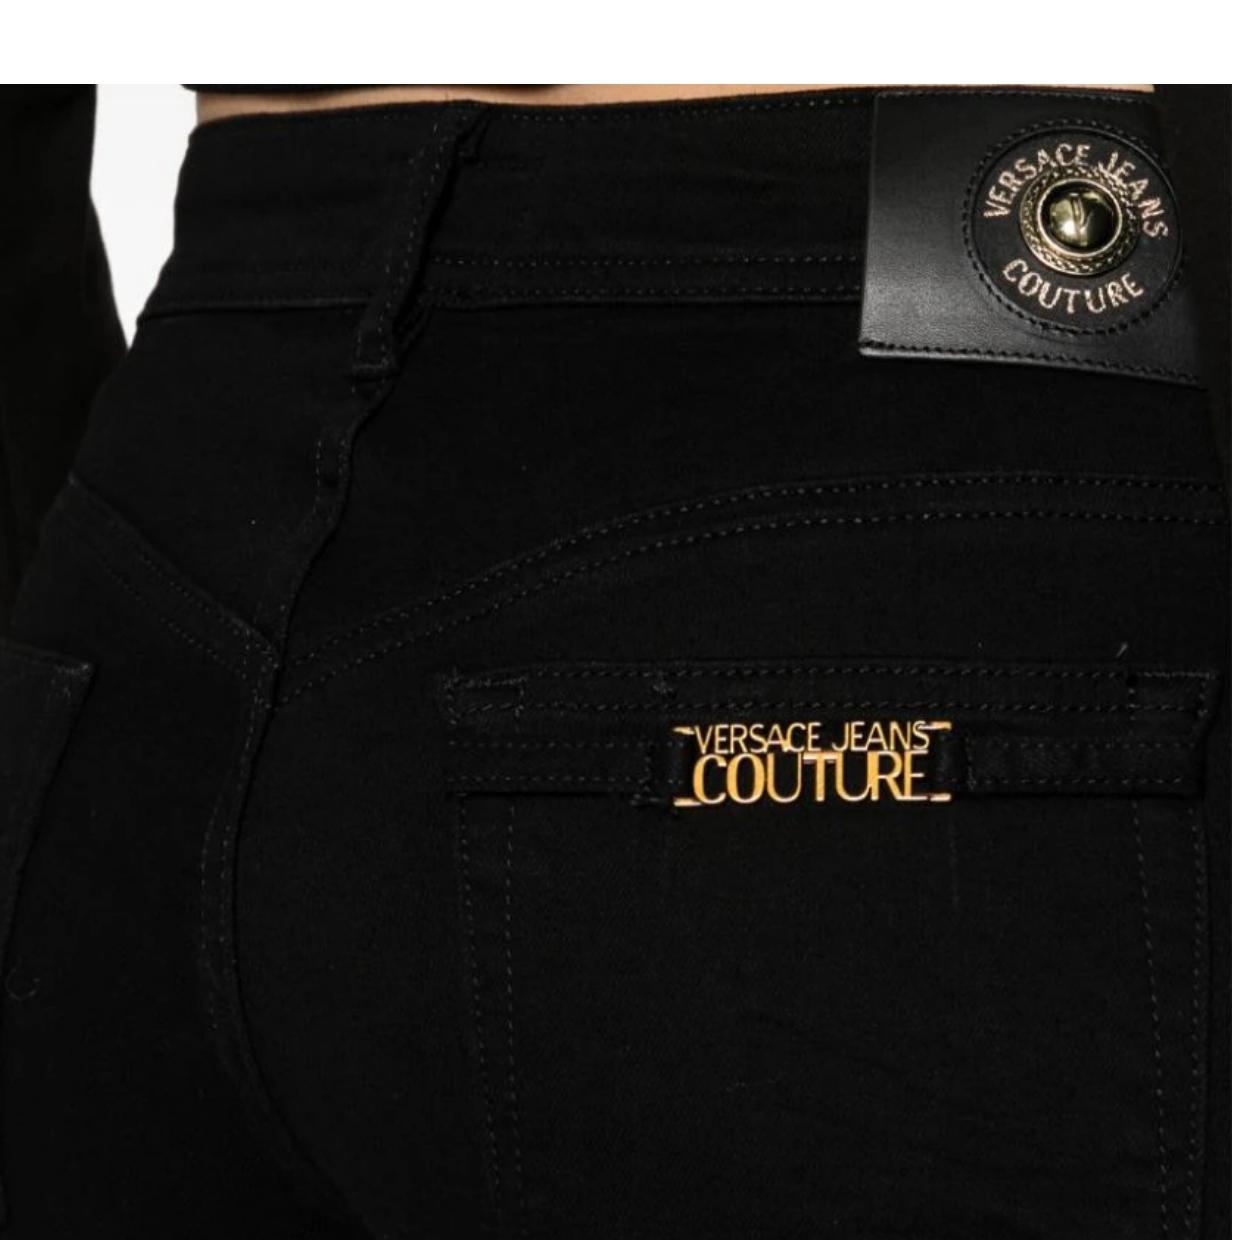 Versace Jeans Couture Gold Tone Logo Skinny Fit Black Denim Jeans